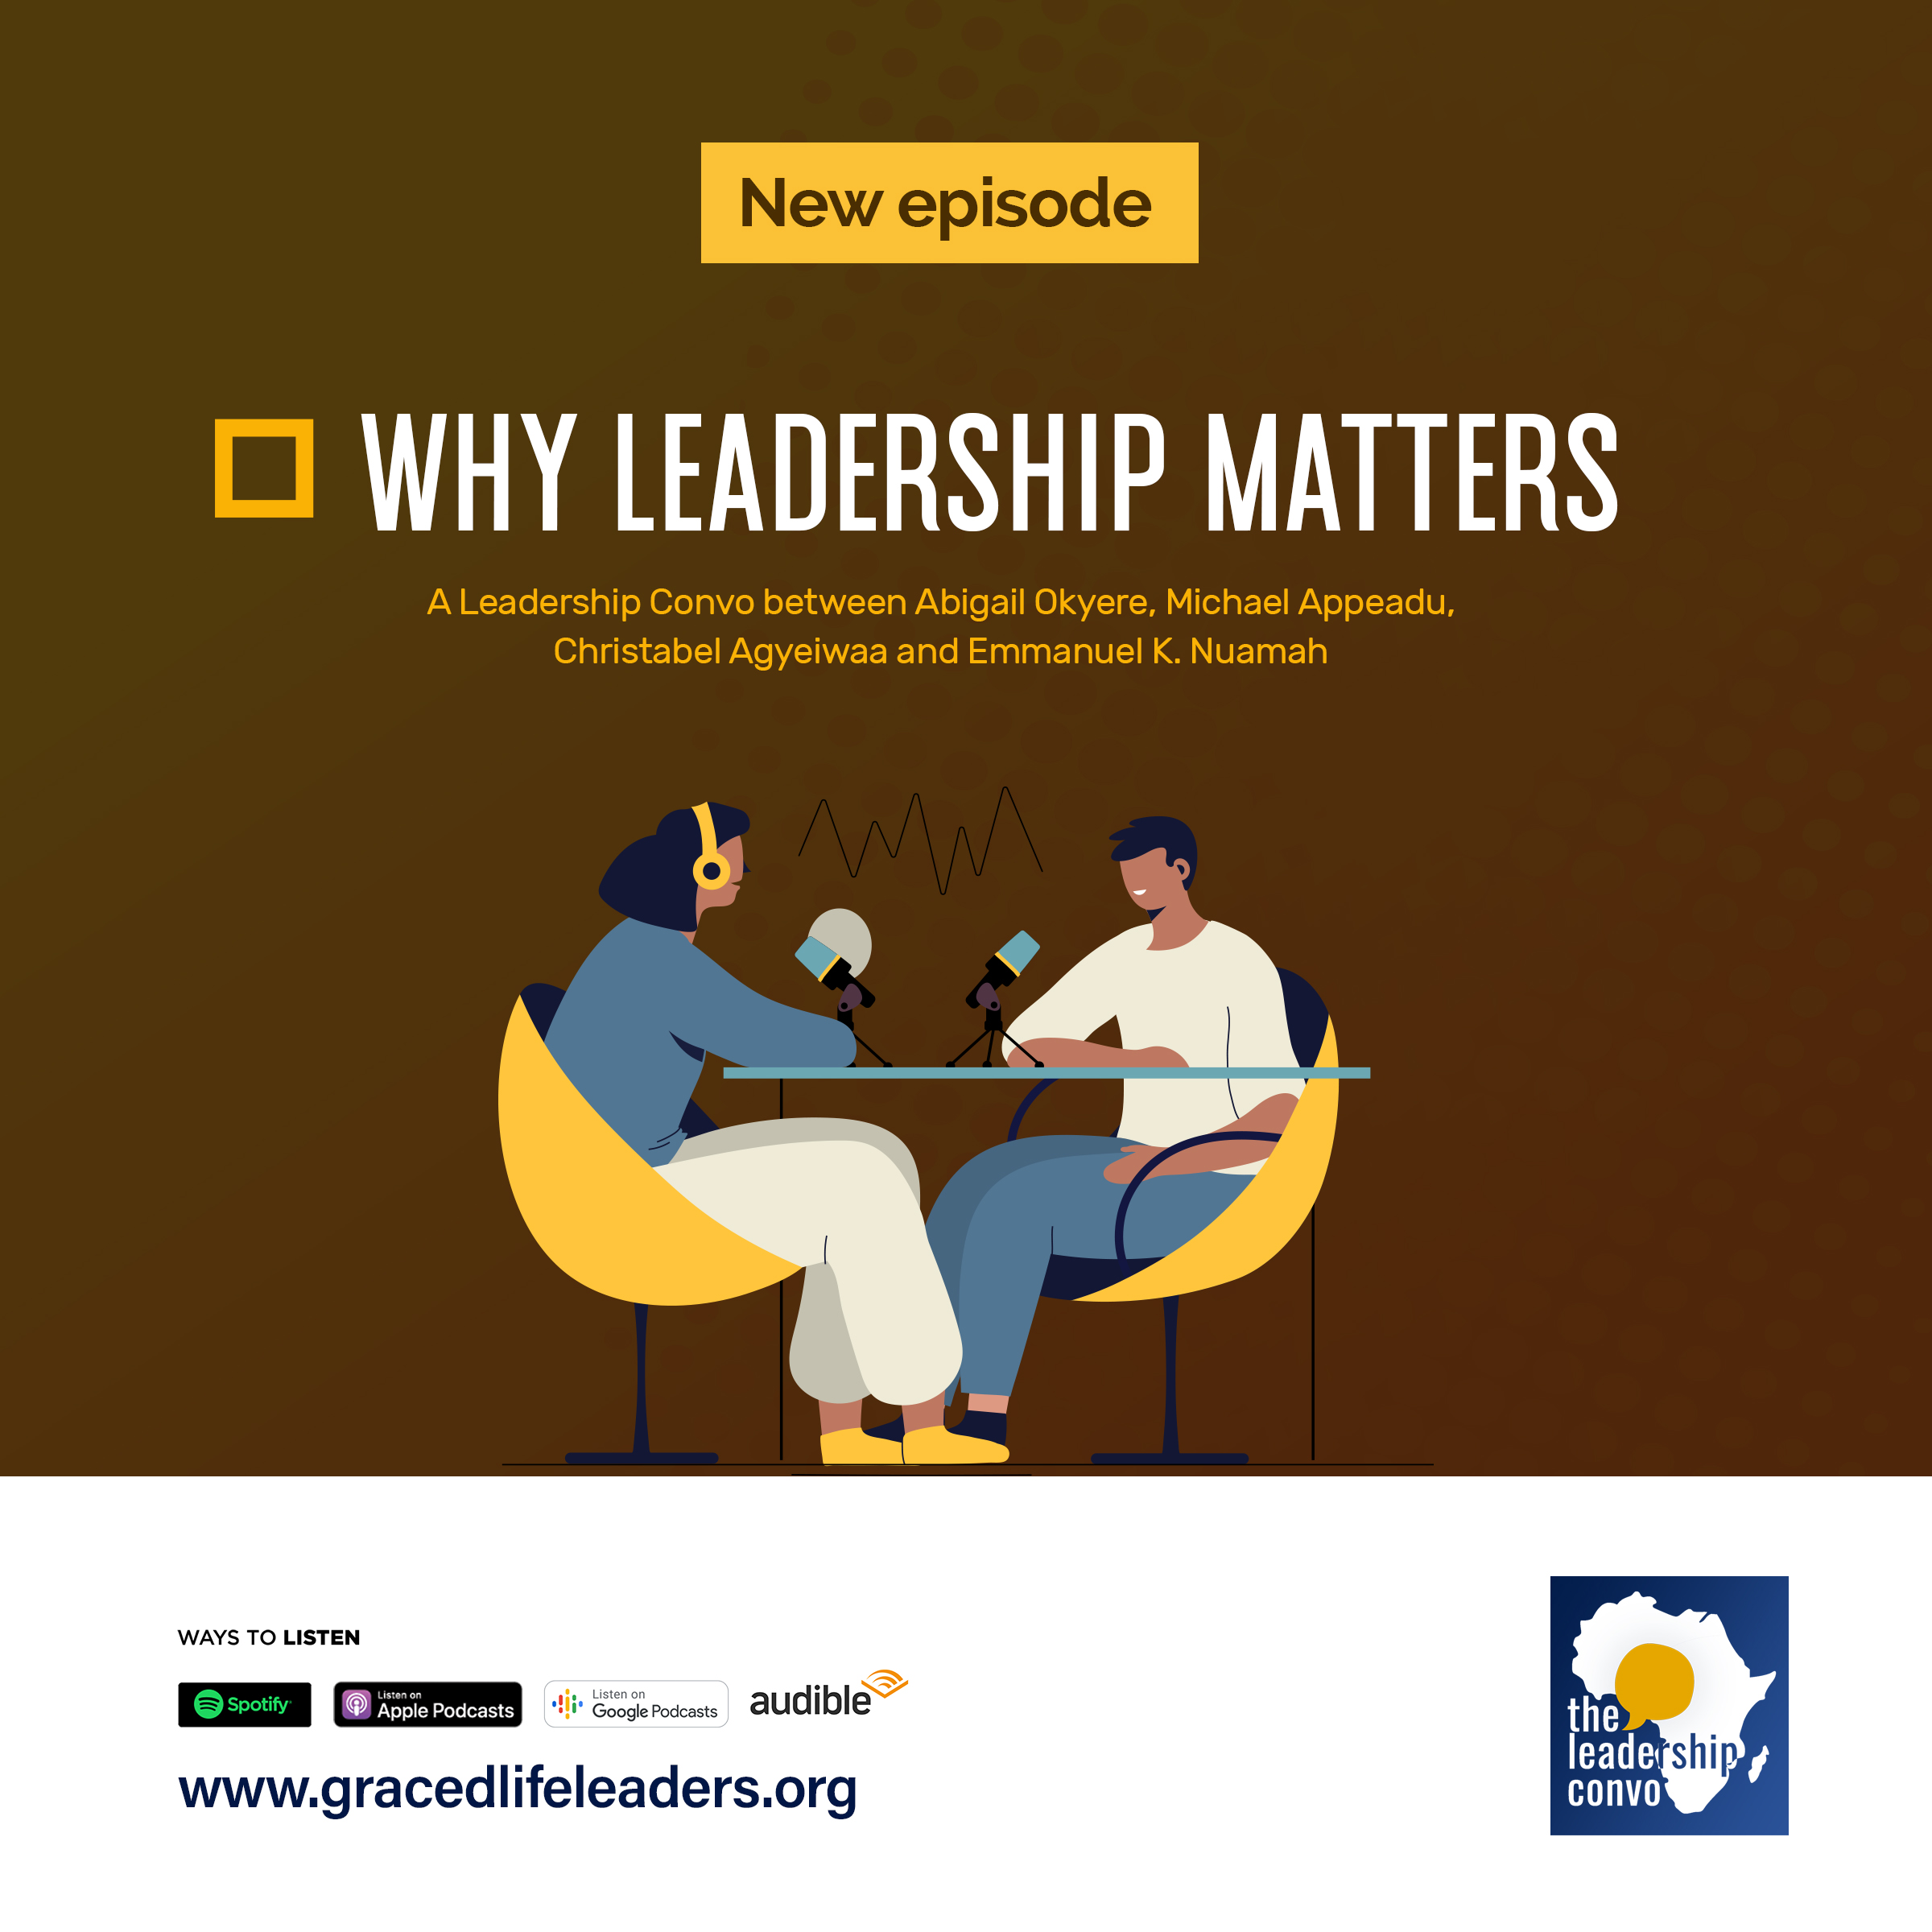 WHY LEADERSHIP MATTERS